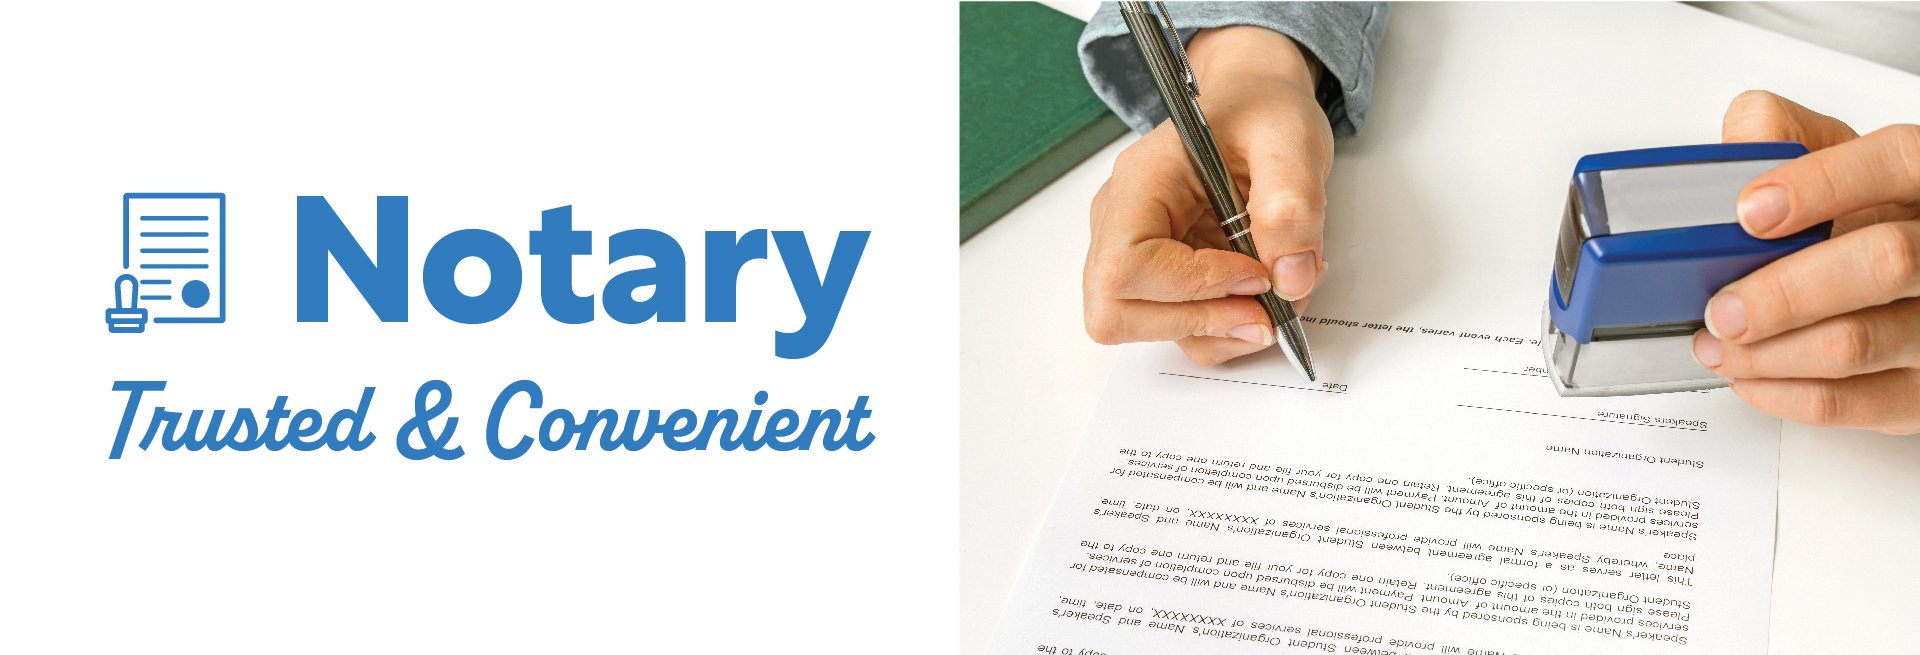 Notary - Trusted and Convenient.